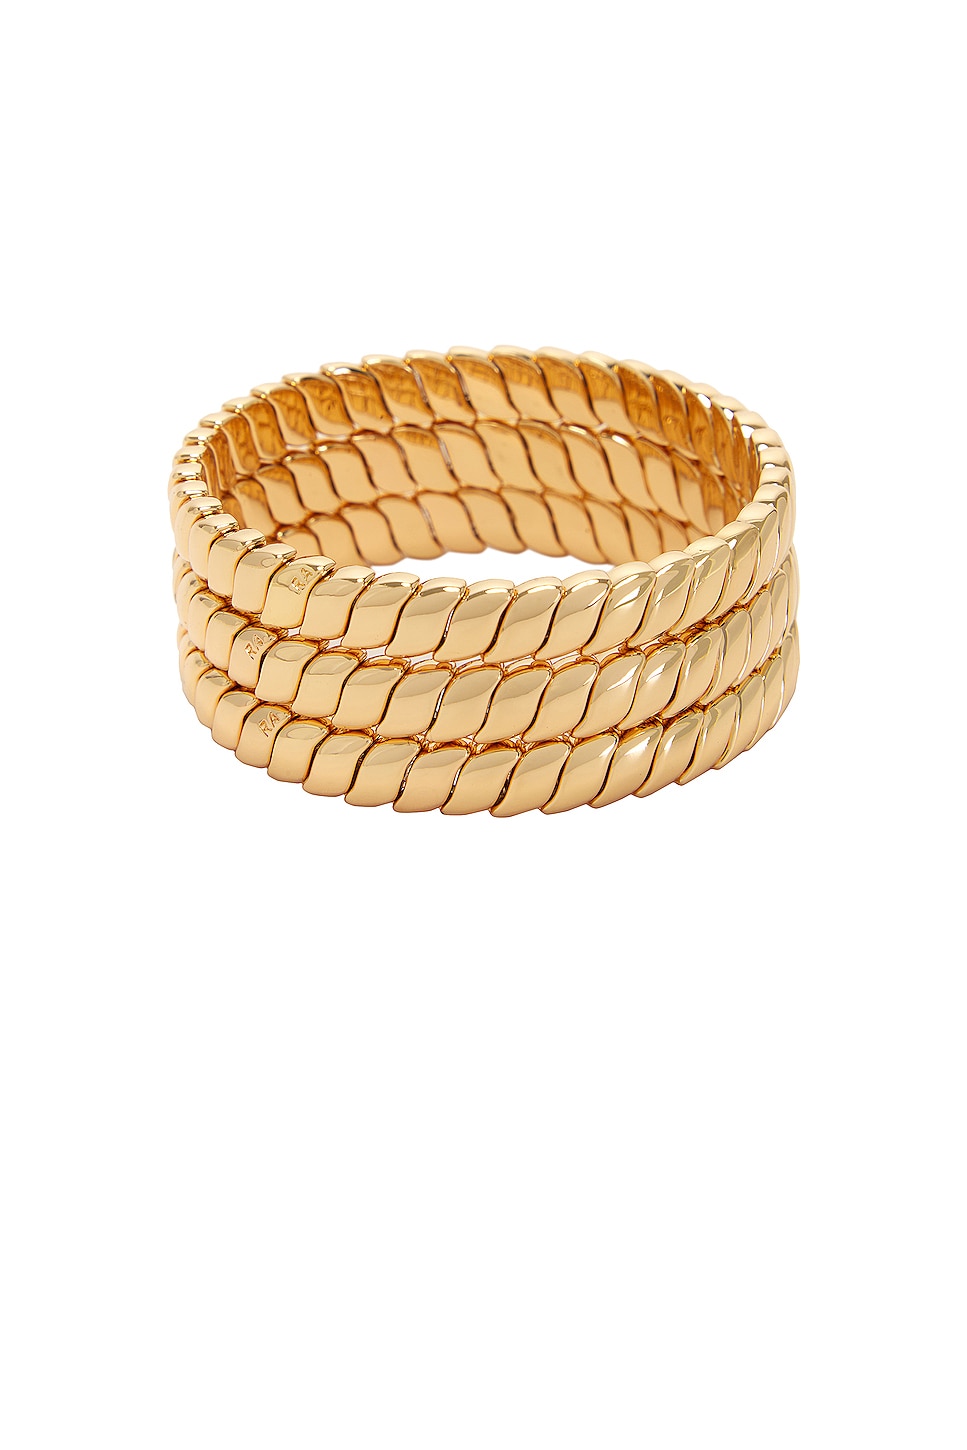 Roxanne Assoulin Smooth Moves Bracelet Trio in Gold | FWRD